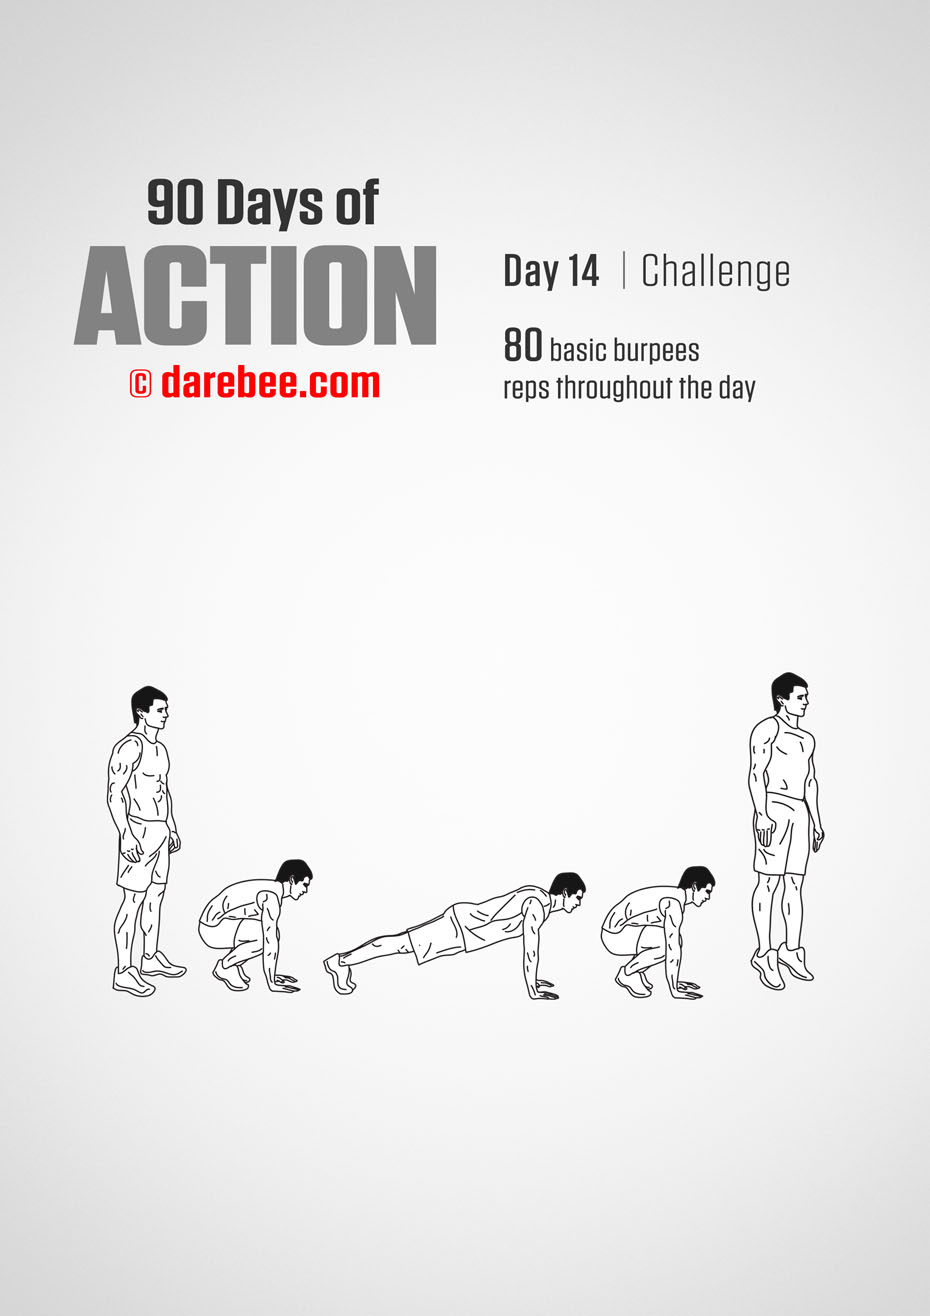 90 Days of Action by DAREBEE